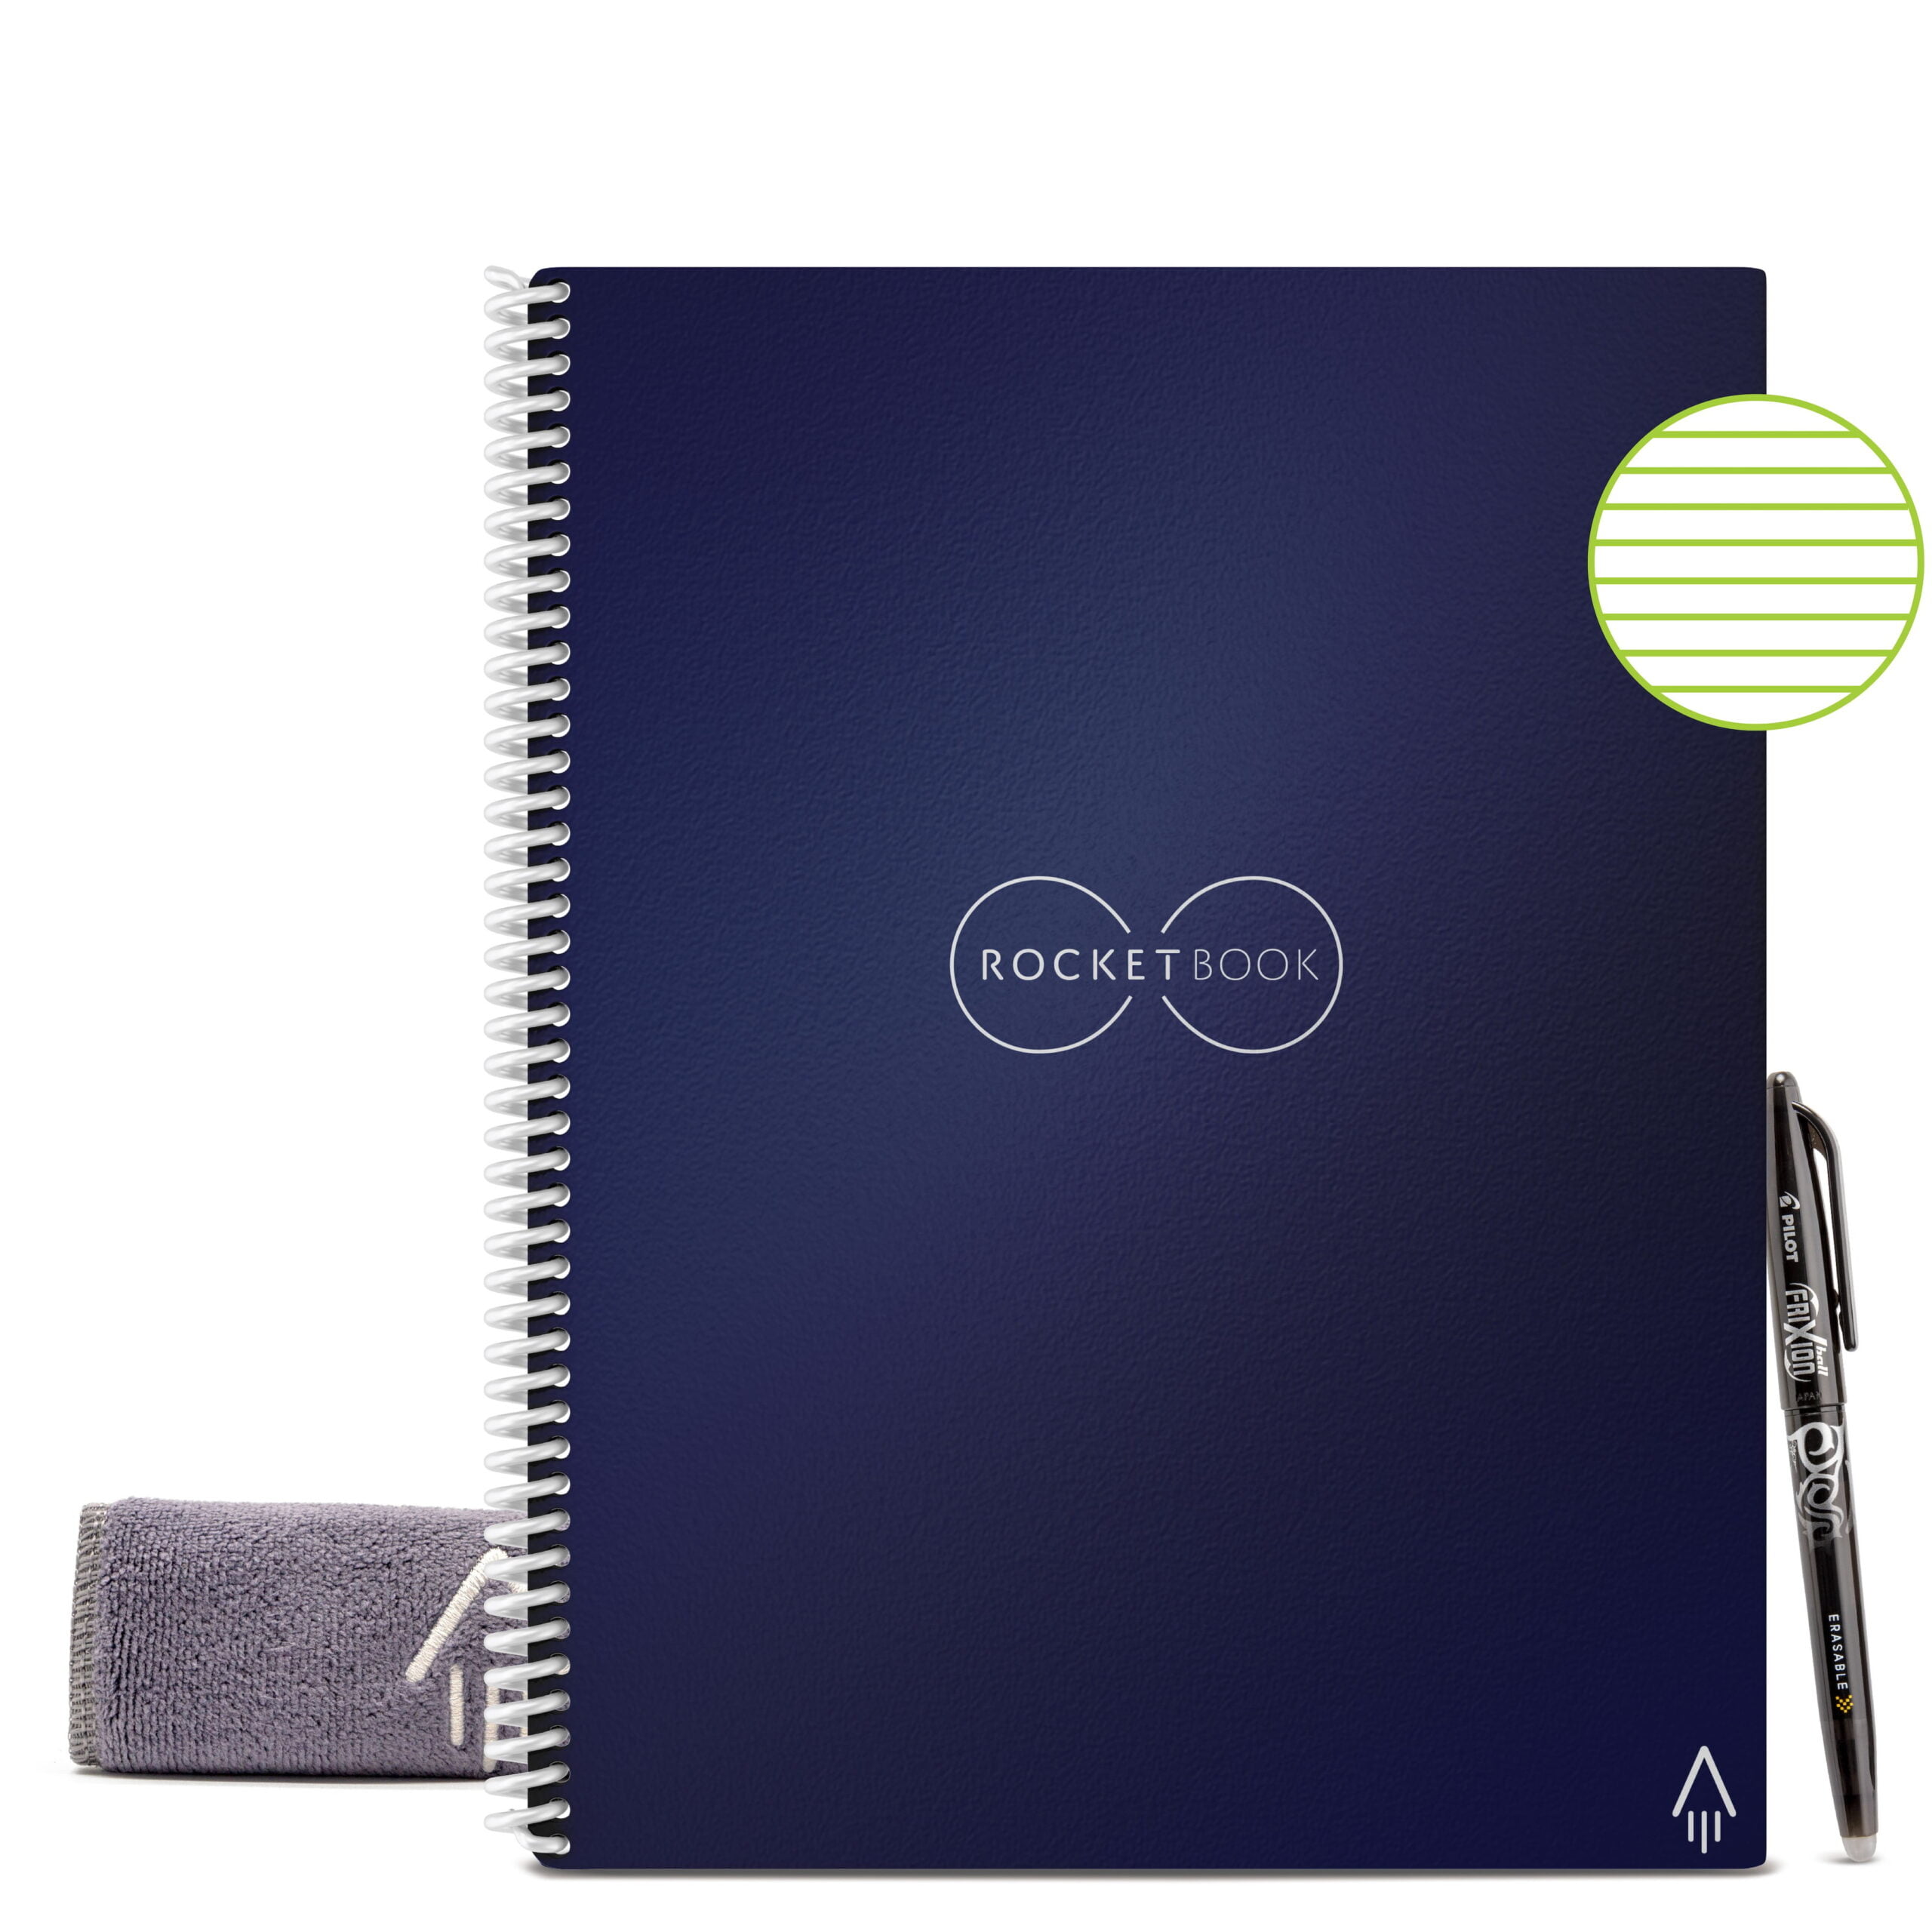 Rocketbook Core Reusable Smart Notebook | Innovative, Eco-Friendly, Digitally Connected Notebook With Cloud Sharing Capabilities | Dotted, 6 X 8.8, 36 Pg, Midnight Blue, With Pen, Cloth, And App Included